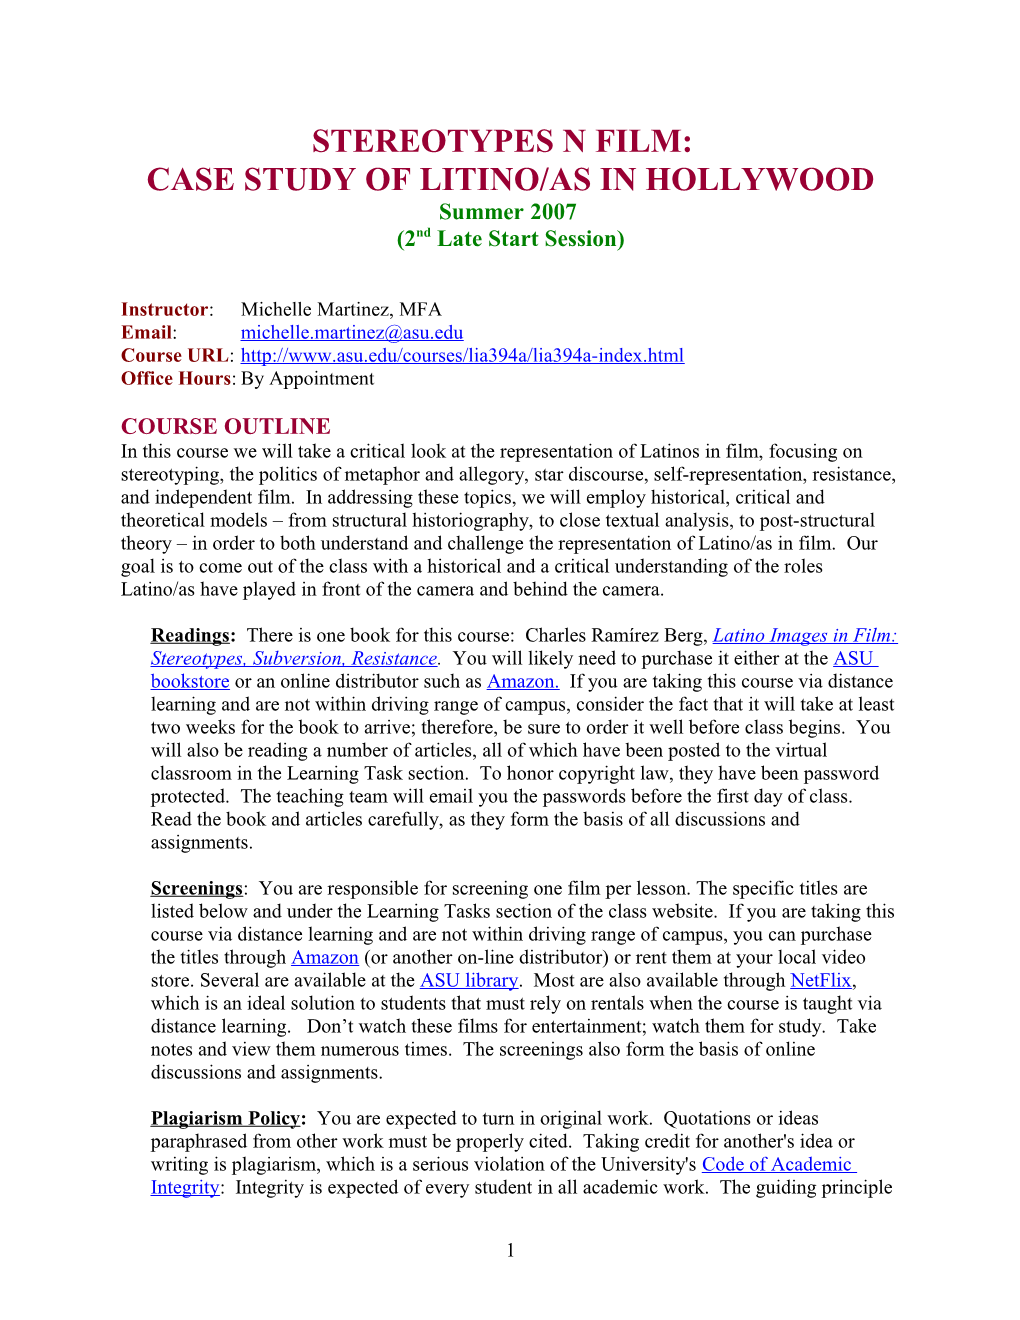 Case Study of Litino/As in Hollywood